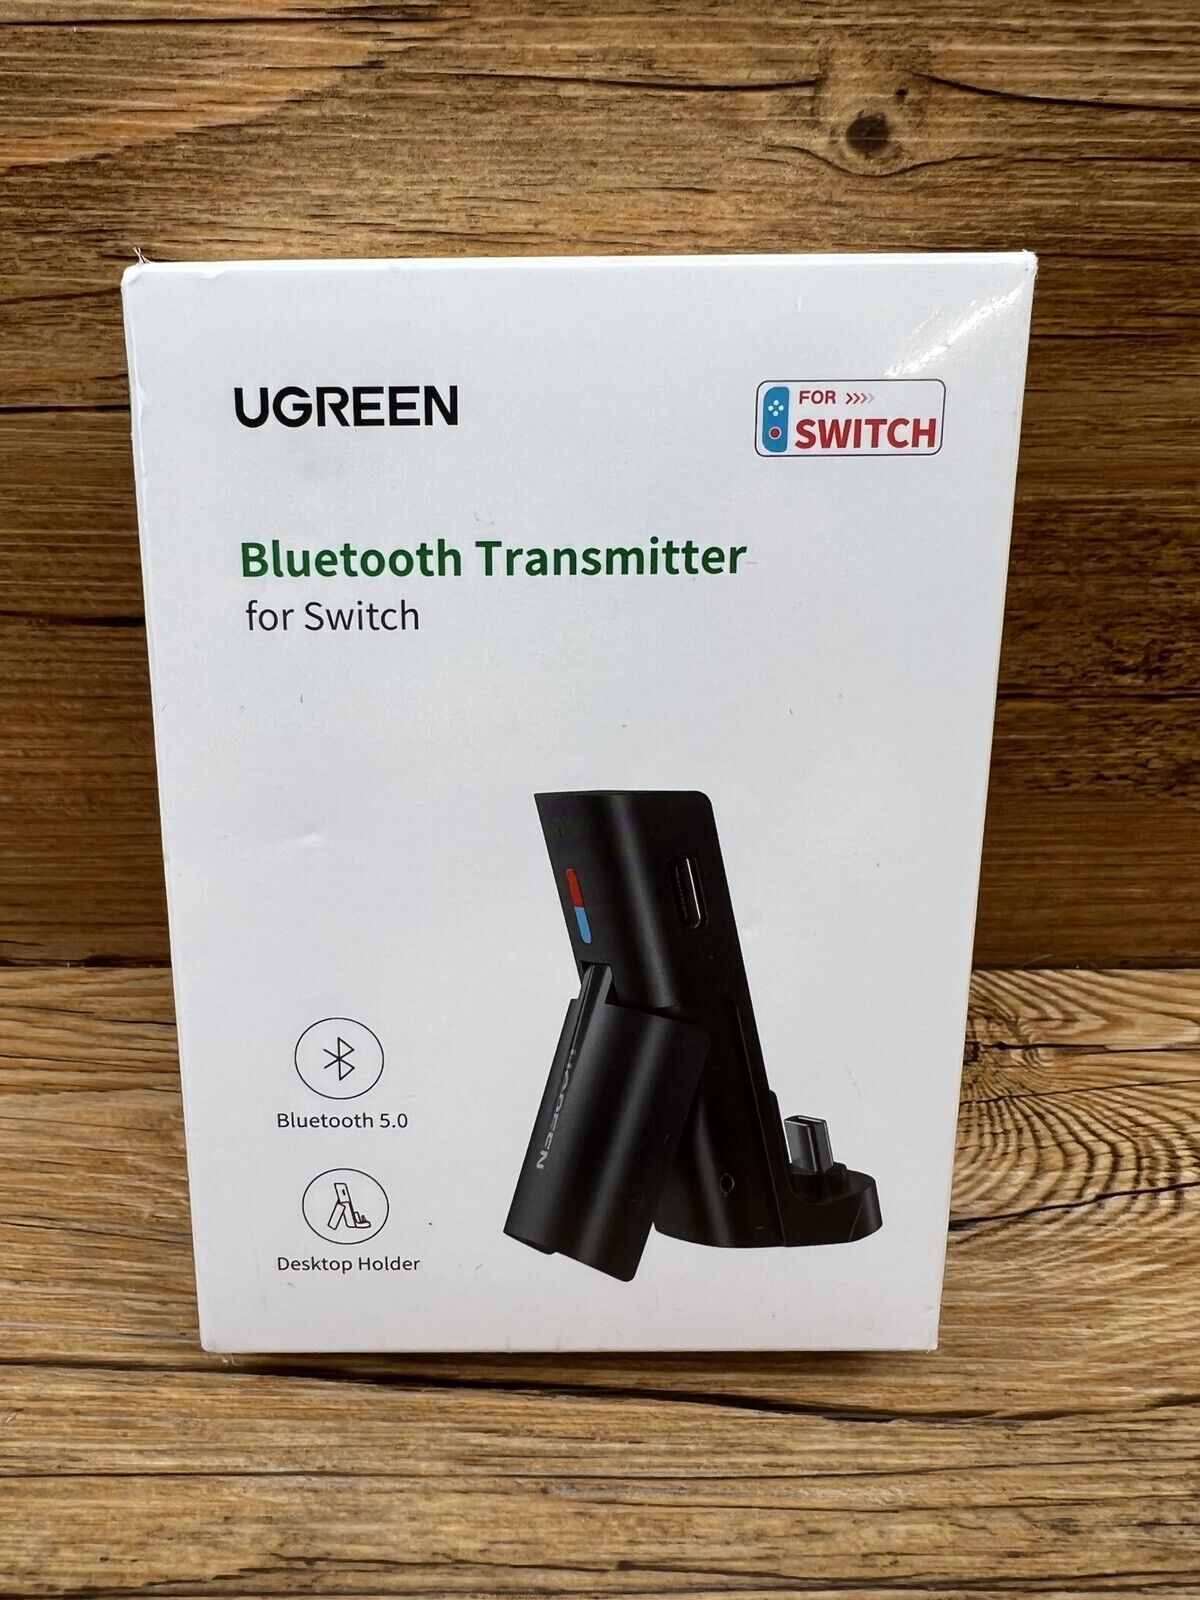 UGREEN Bluetooth 5.0 Transmitter Compatible for Nintendo Switch Sealed